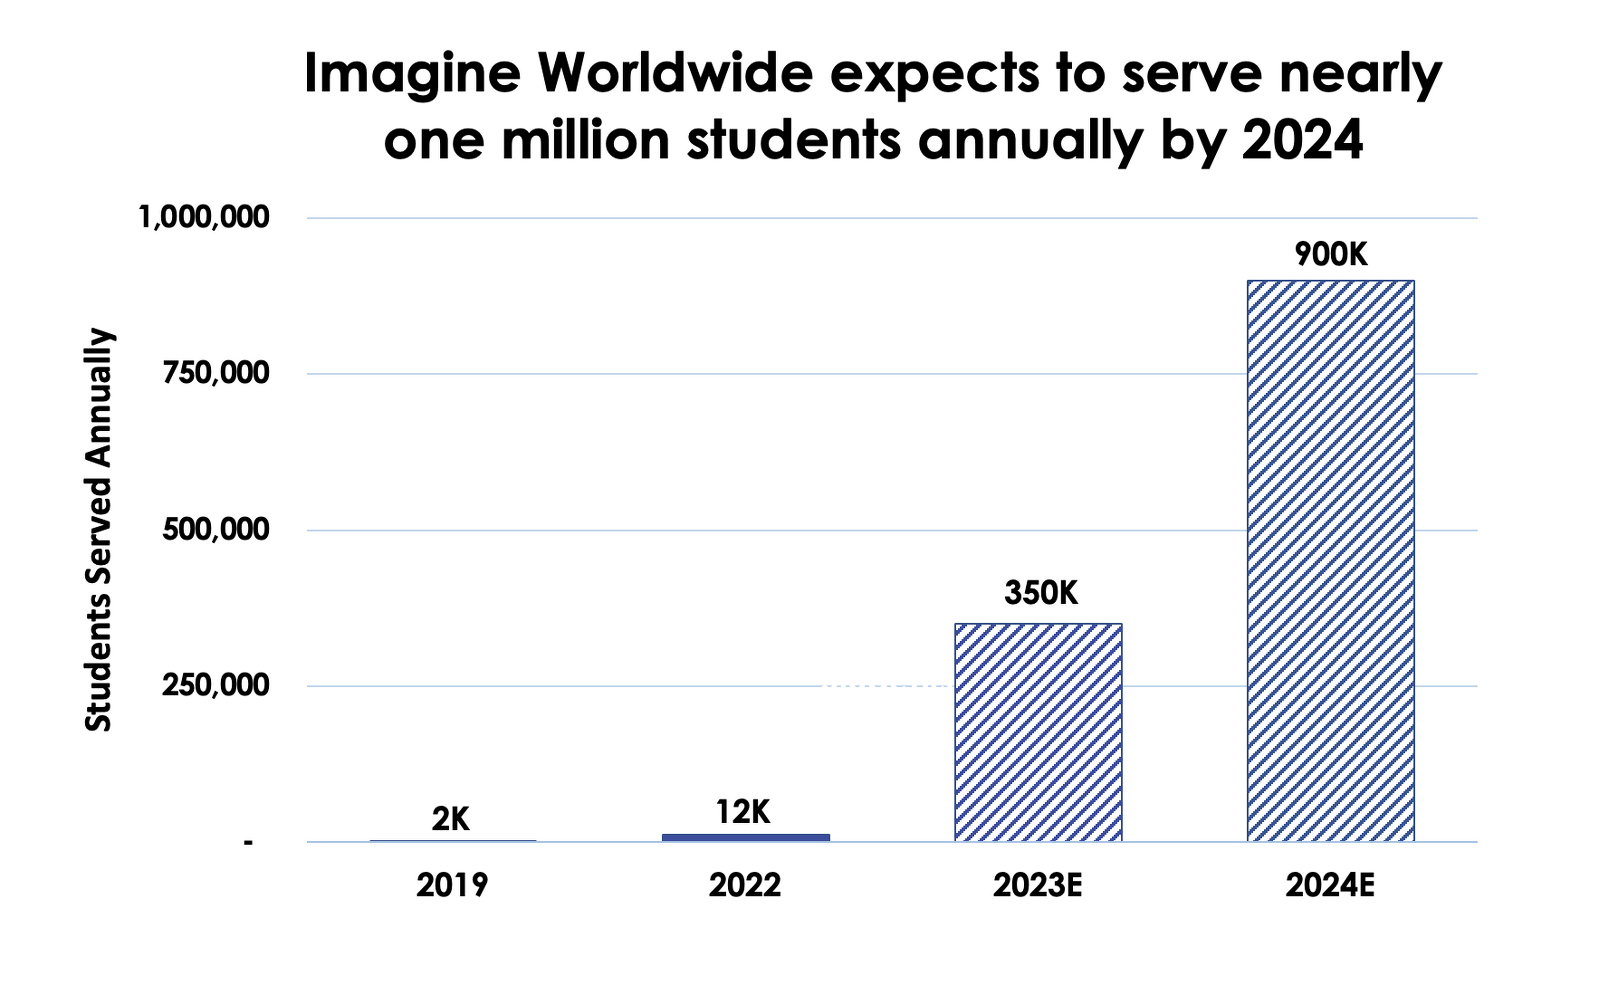 Imagine Worldwide expects to serve nearly one million students annually by 2024